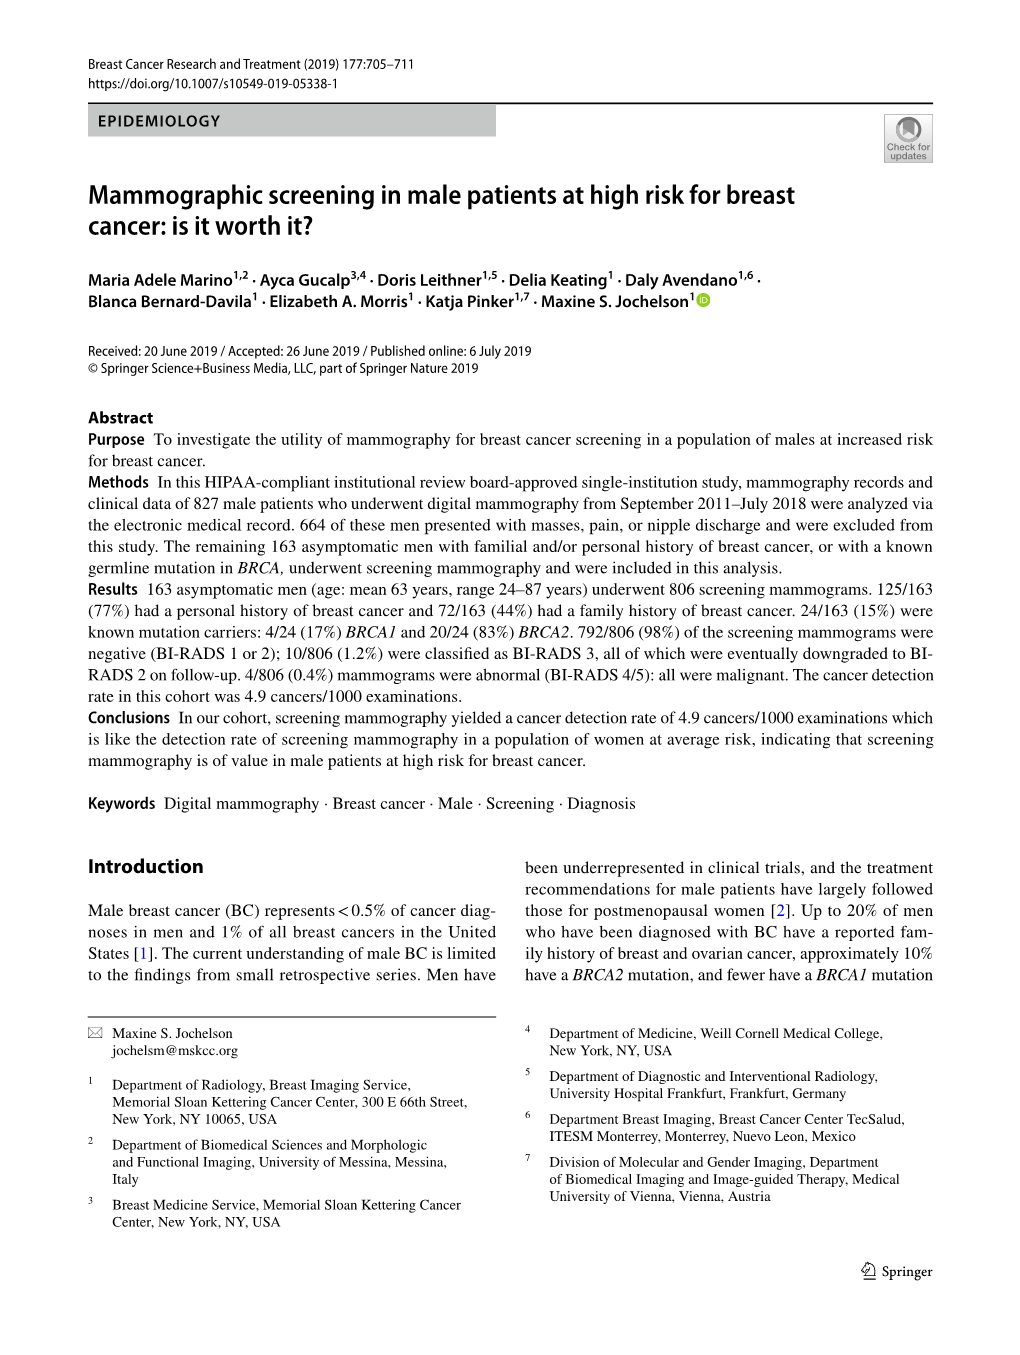 Mammographic Screening in Male Patients at High Risk for Breast Cancer: Is It Worth It?